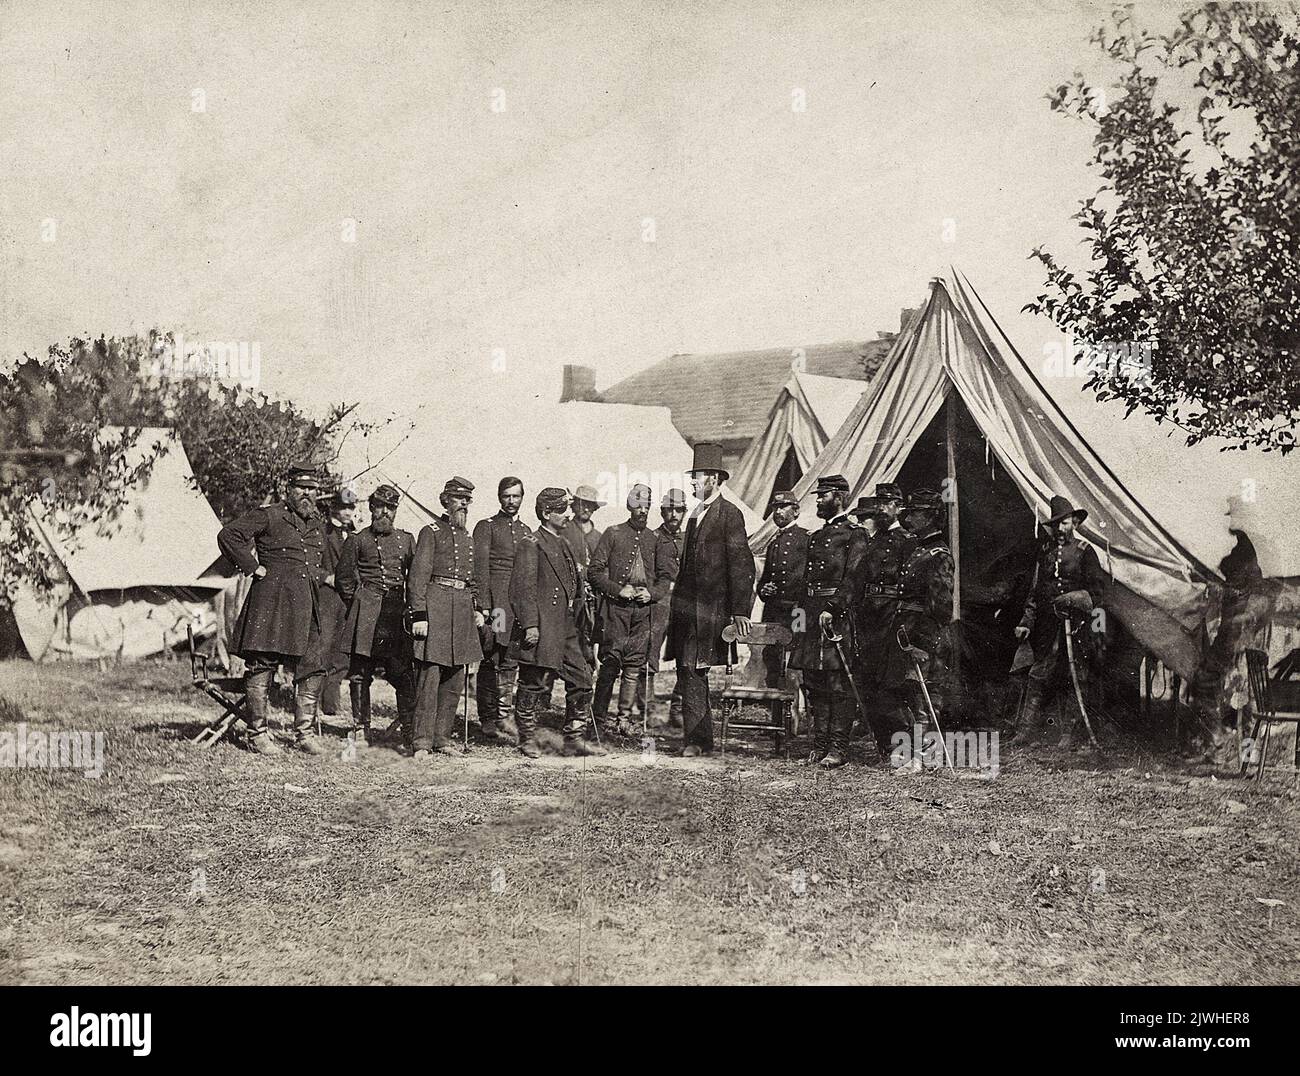 Lincoln with officers after the Battle of Antietam. Notable figures (from left) are 1. Col. Delos Sackett; 4. Gen. George W. Morell; 5. Alexander S. Webb, Chief of Staff, V Corps; 6. McClellan;. 8. Dr. Jonathan Letterman; 10. Lincoln; 11. Henry J. Hunt; 12. Fitz John Porter; 15. Andrew A. Humphreys; 16. Capt. George Armstrong Custer. Stock Photo